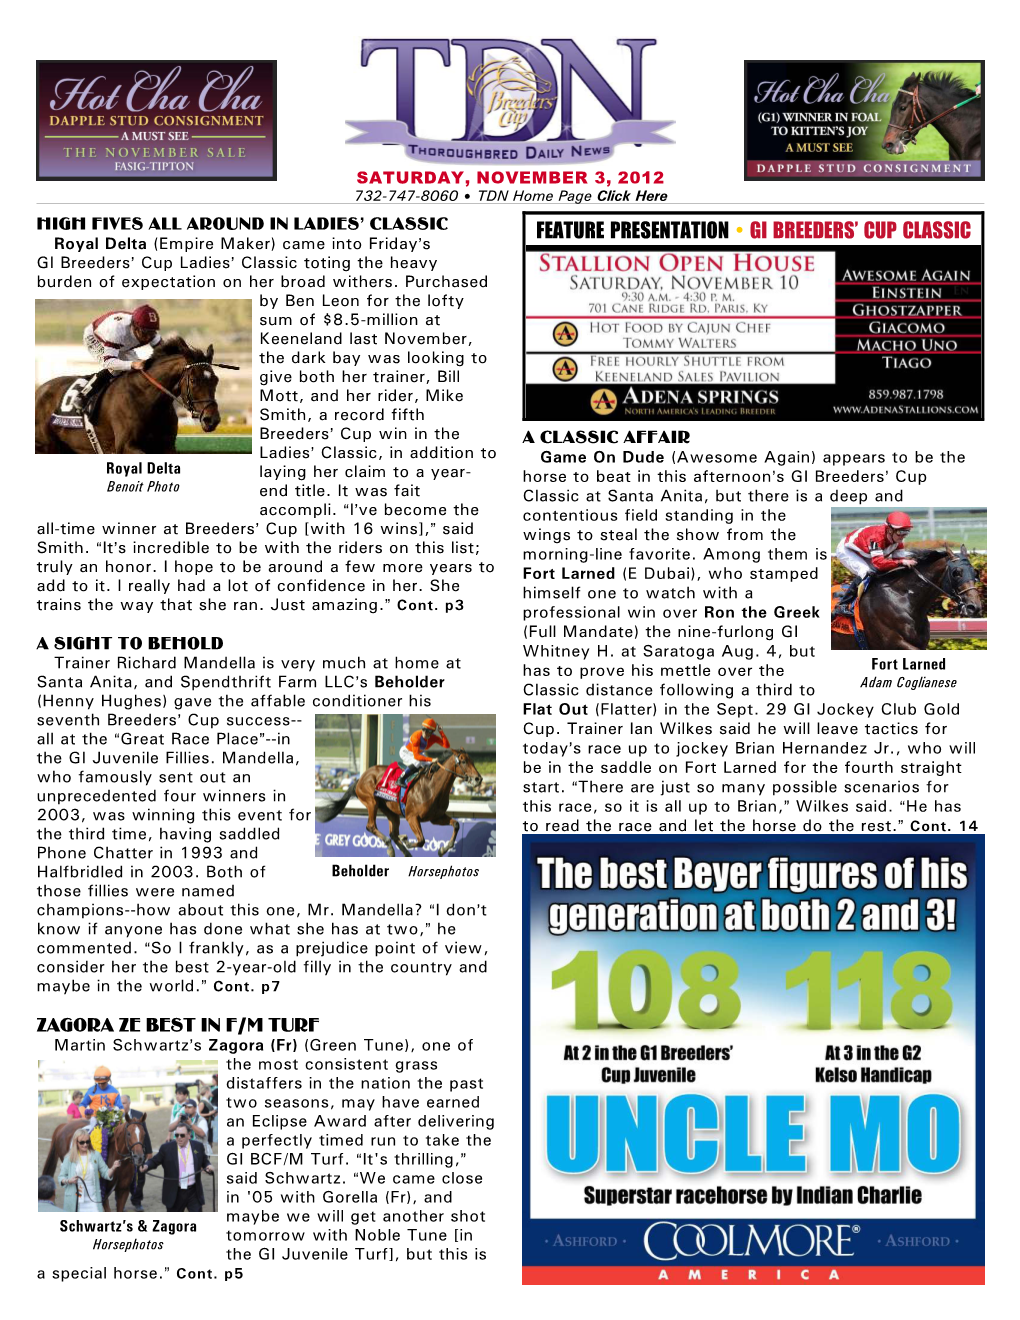 Feature Presentation • Gi Breeders' Cup Classic